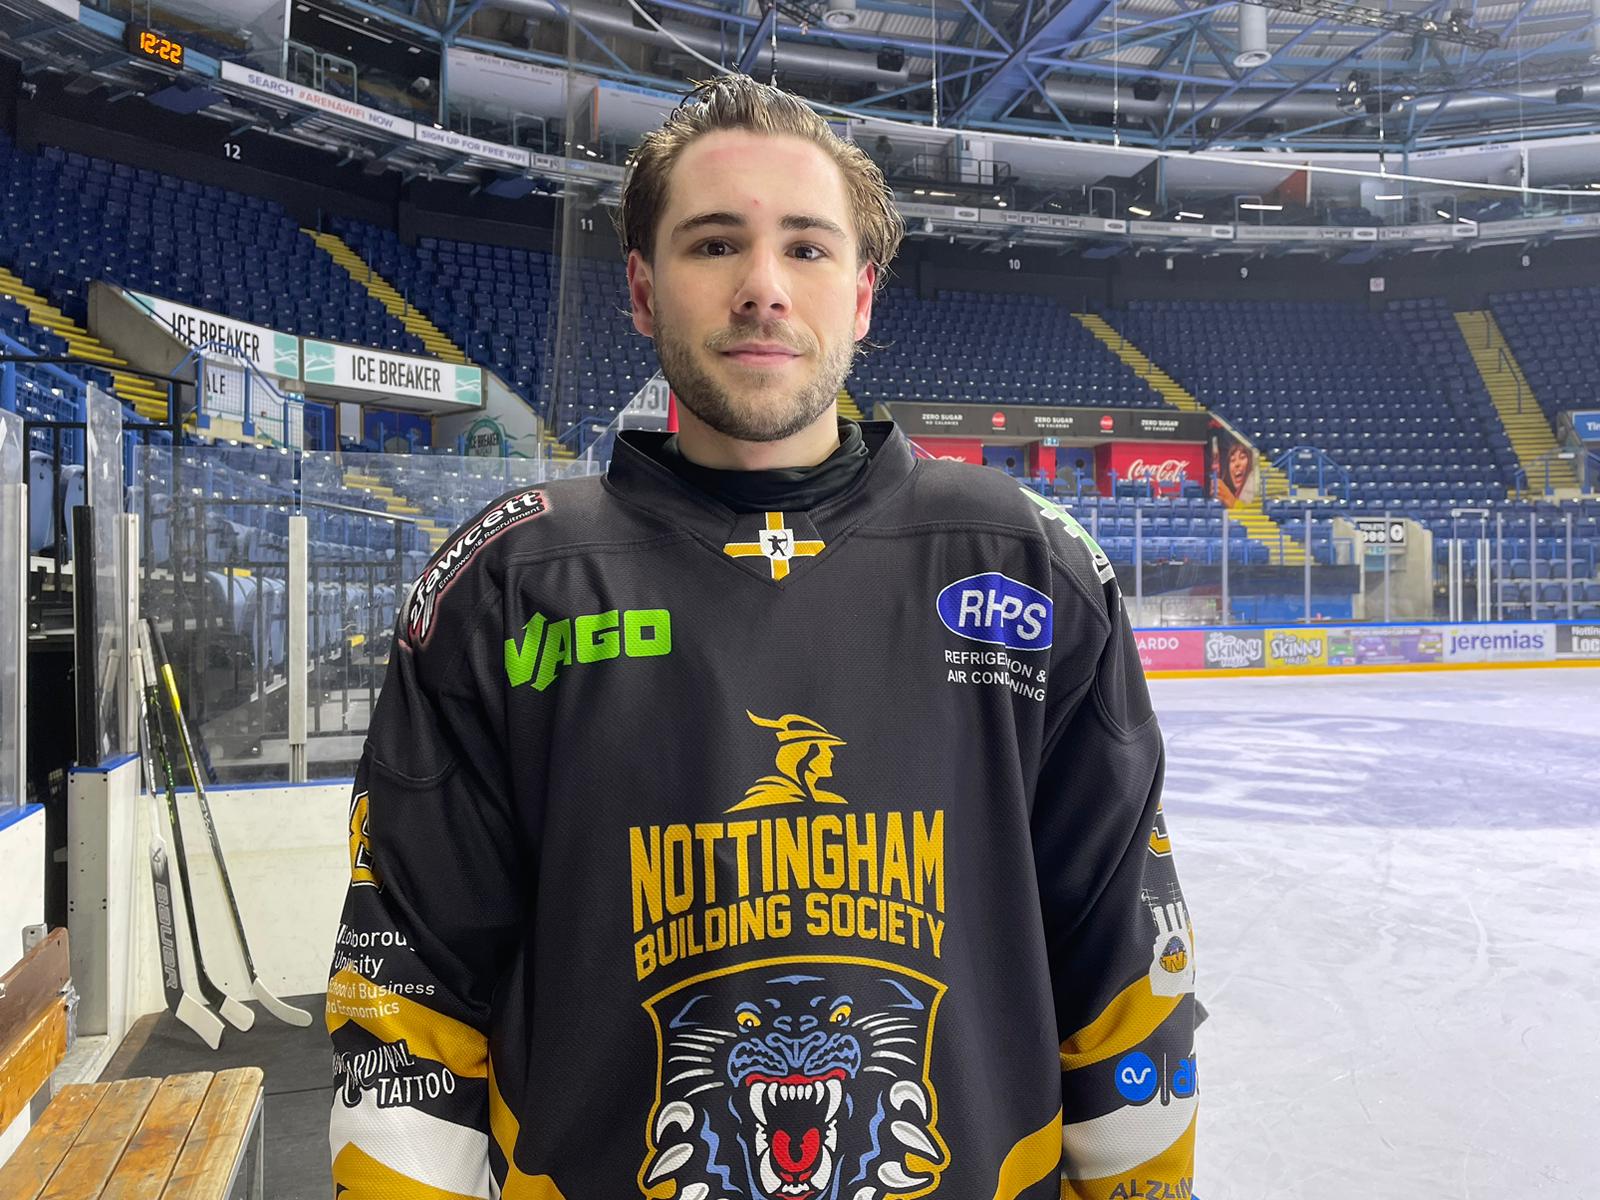 PARÉ PLANS TO BRING 'ENERGY' TO THE PANTHERS Top Image